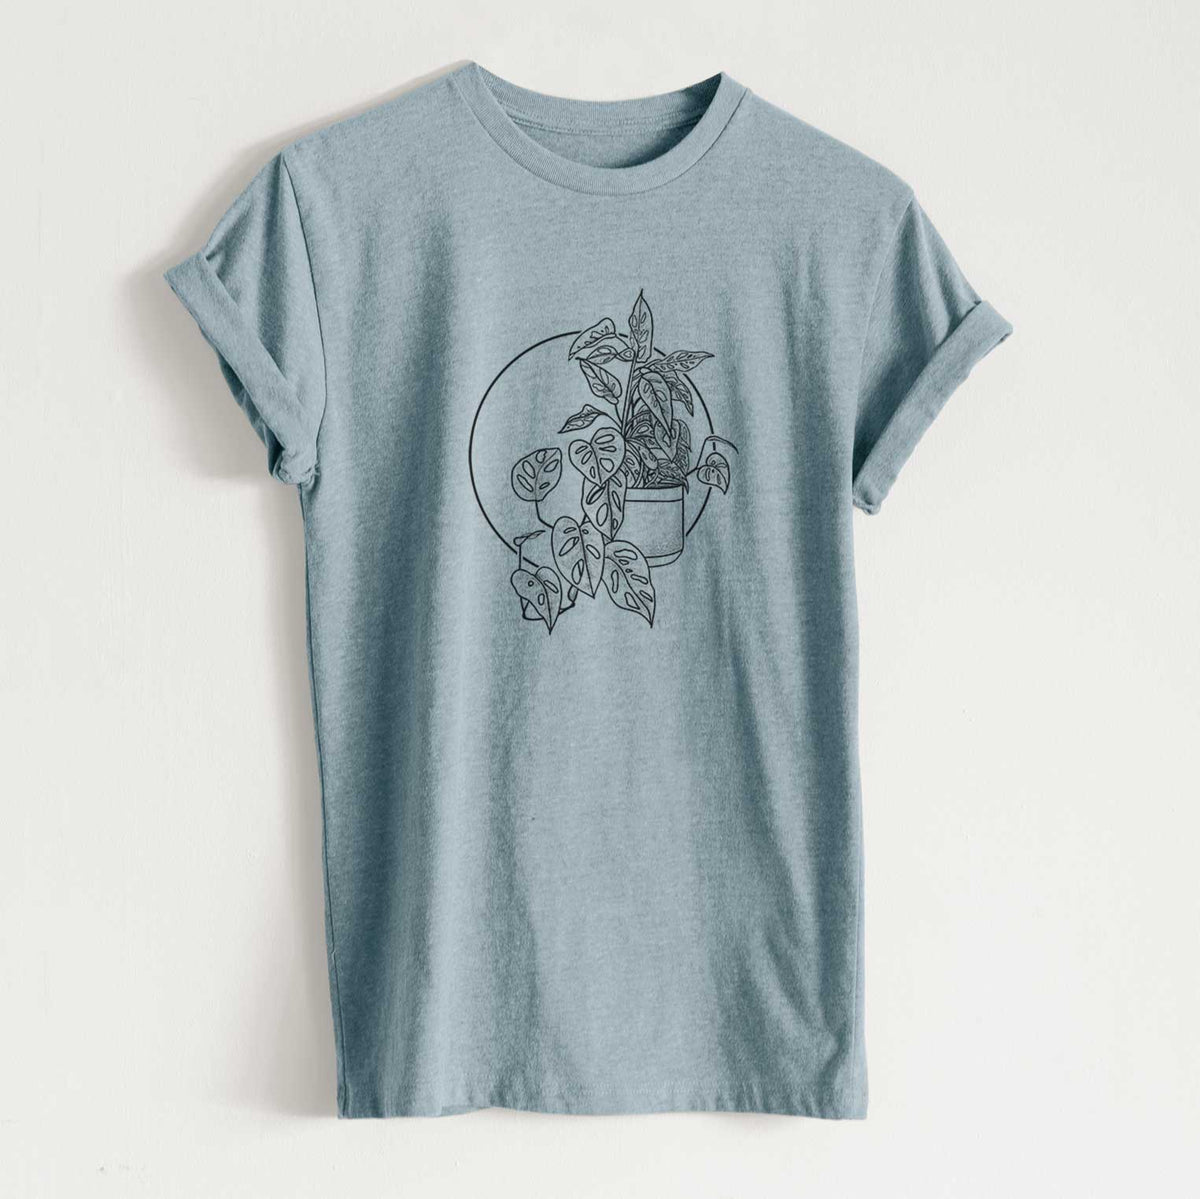 Monstera Adansonii - Unisex Recycled Eco Tee  - CLOSEOUT - FINAL SALE